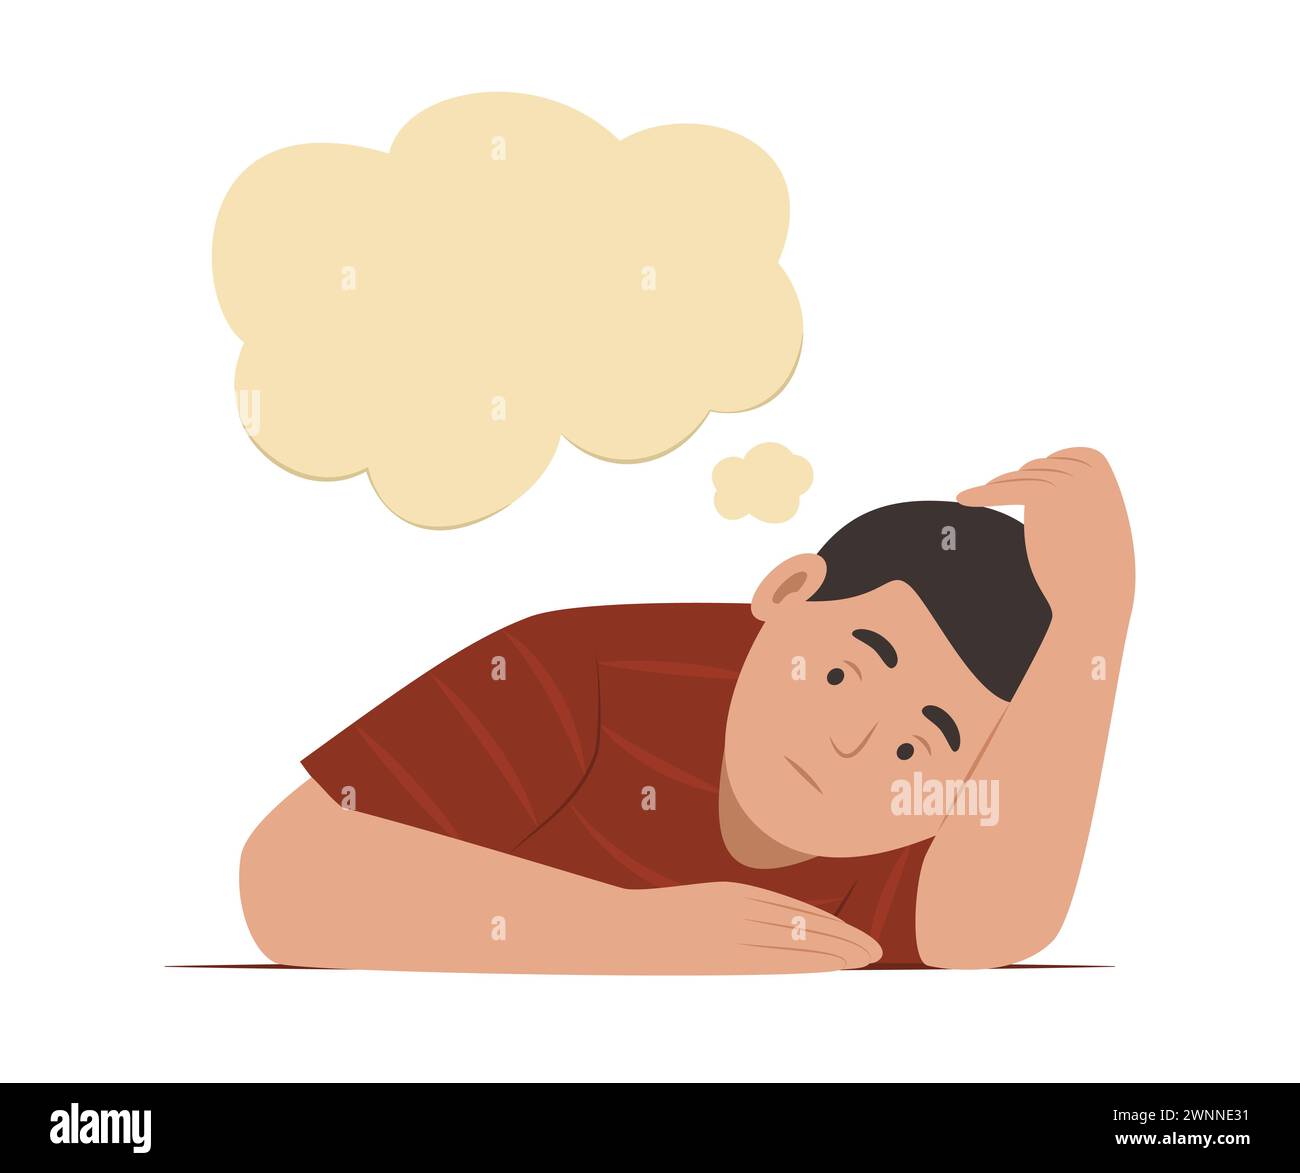 Bored Teenage Boy Thinking and Looking Up at Thinking Bubble Concept Illustration Stock Vector